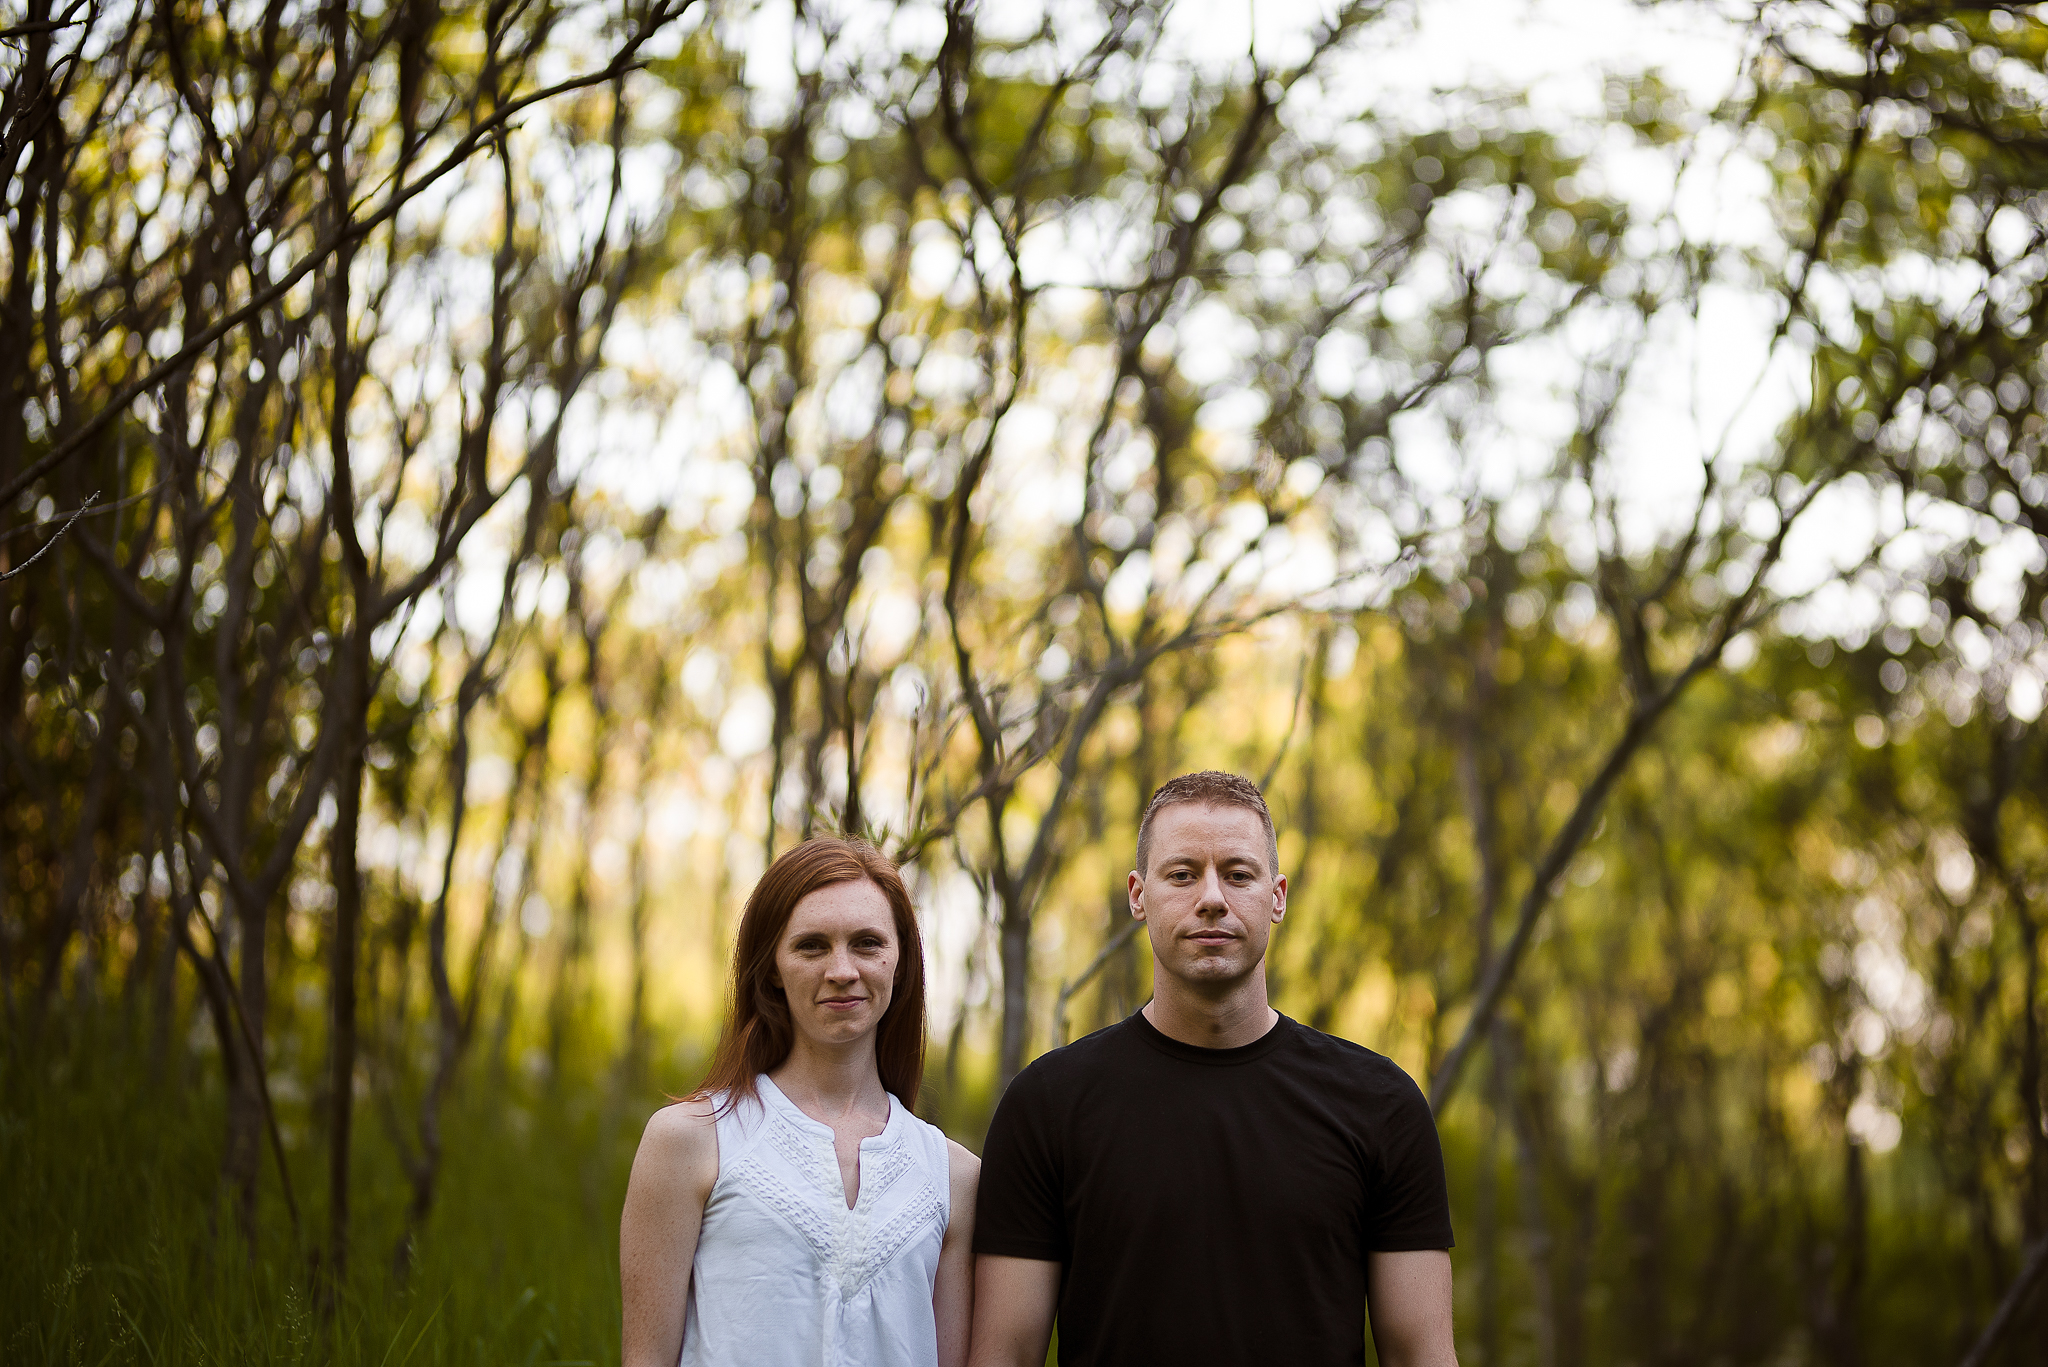 Couples186NaomiLuciennePhotography062019-4-Edit.jpg